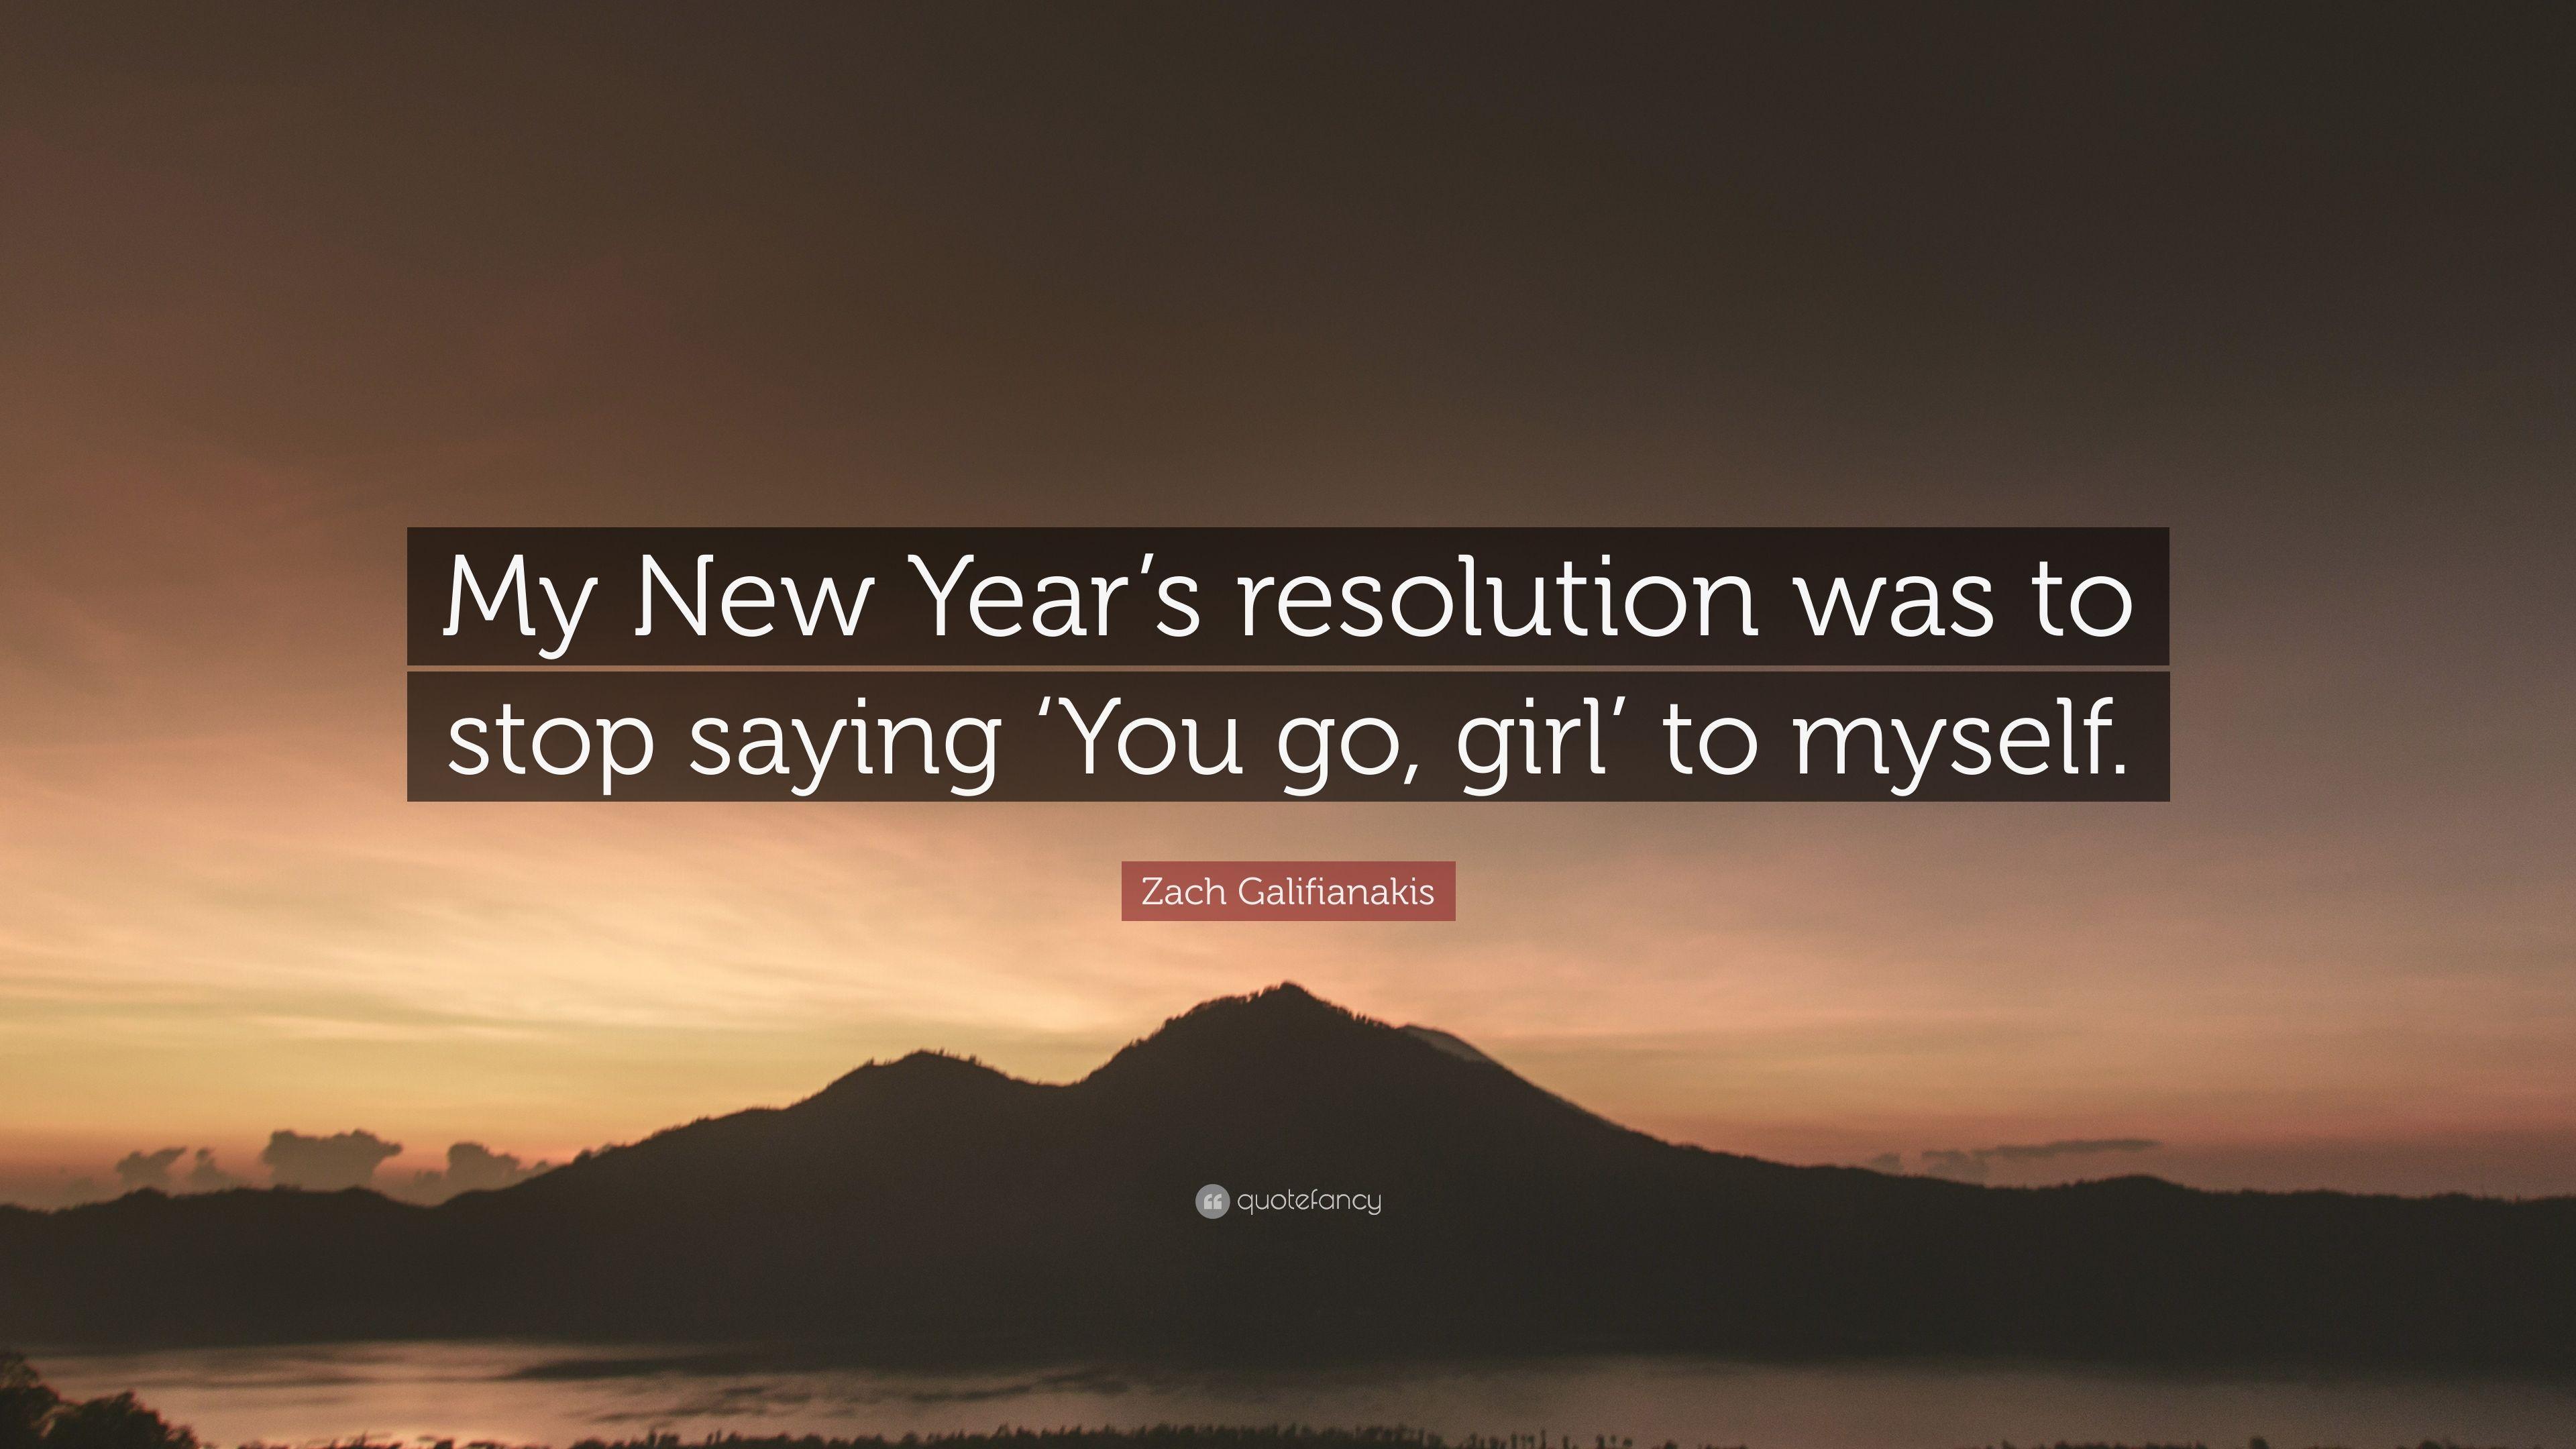 Zach Galifianakis Quote: “My New Year's resolution was to